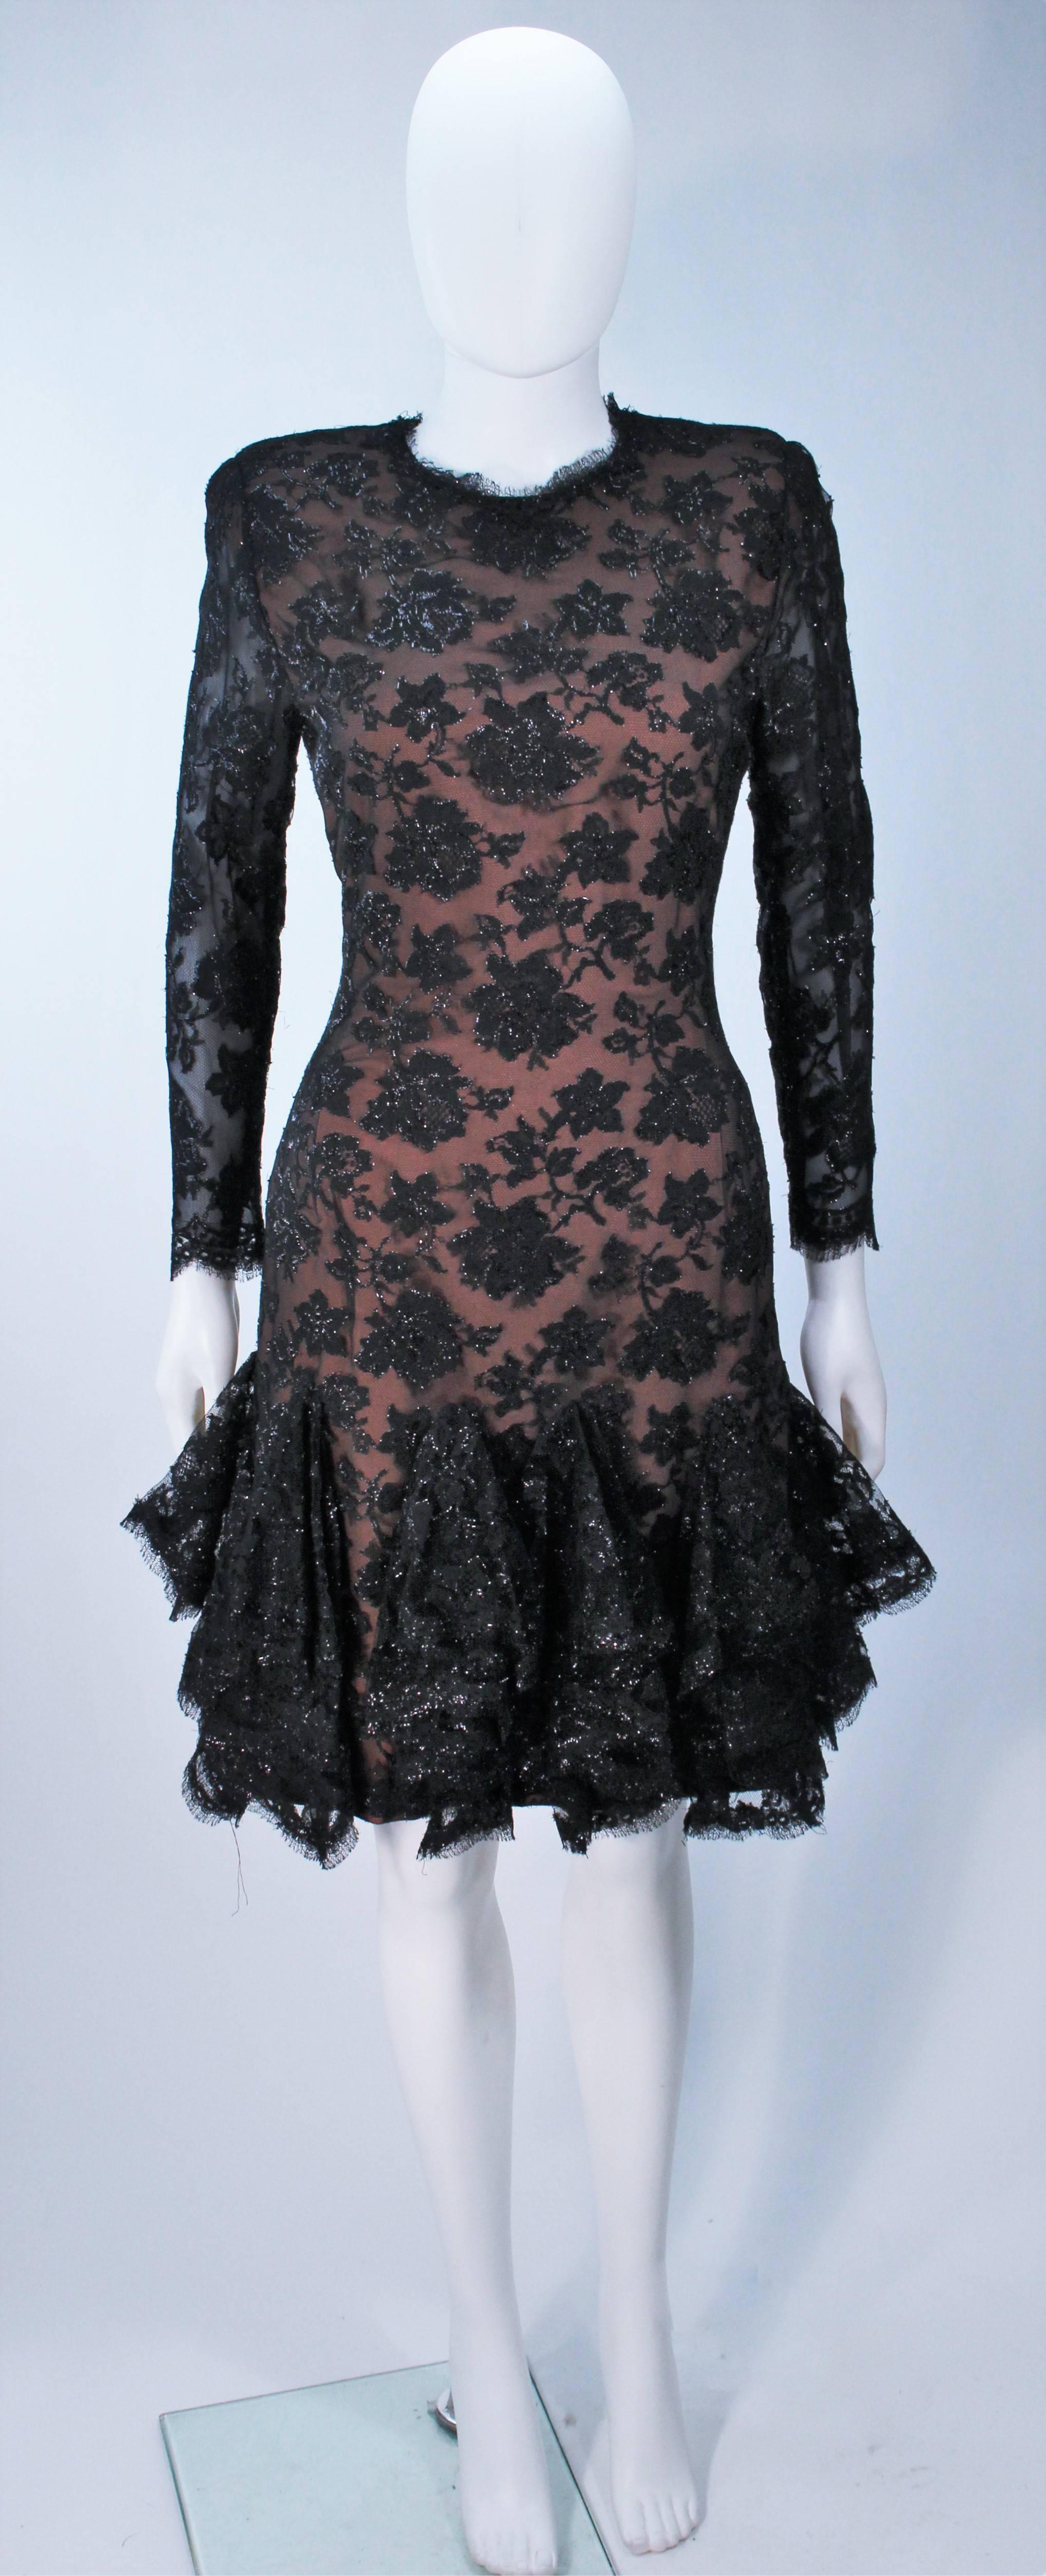  This Travilla  cocktail dress is composed of a black on black metallic silk lace lame with nude underlay. The dress features a draped ruffle hem with scallop edges. There is a center back zipper closure. In excellent vintage condition.

 